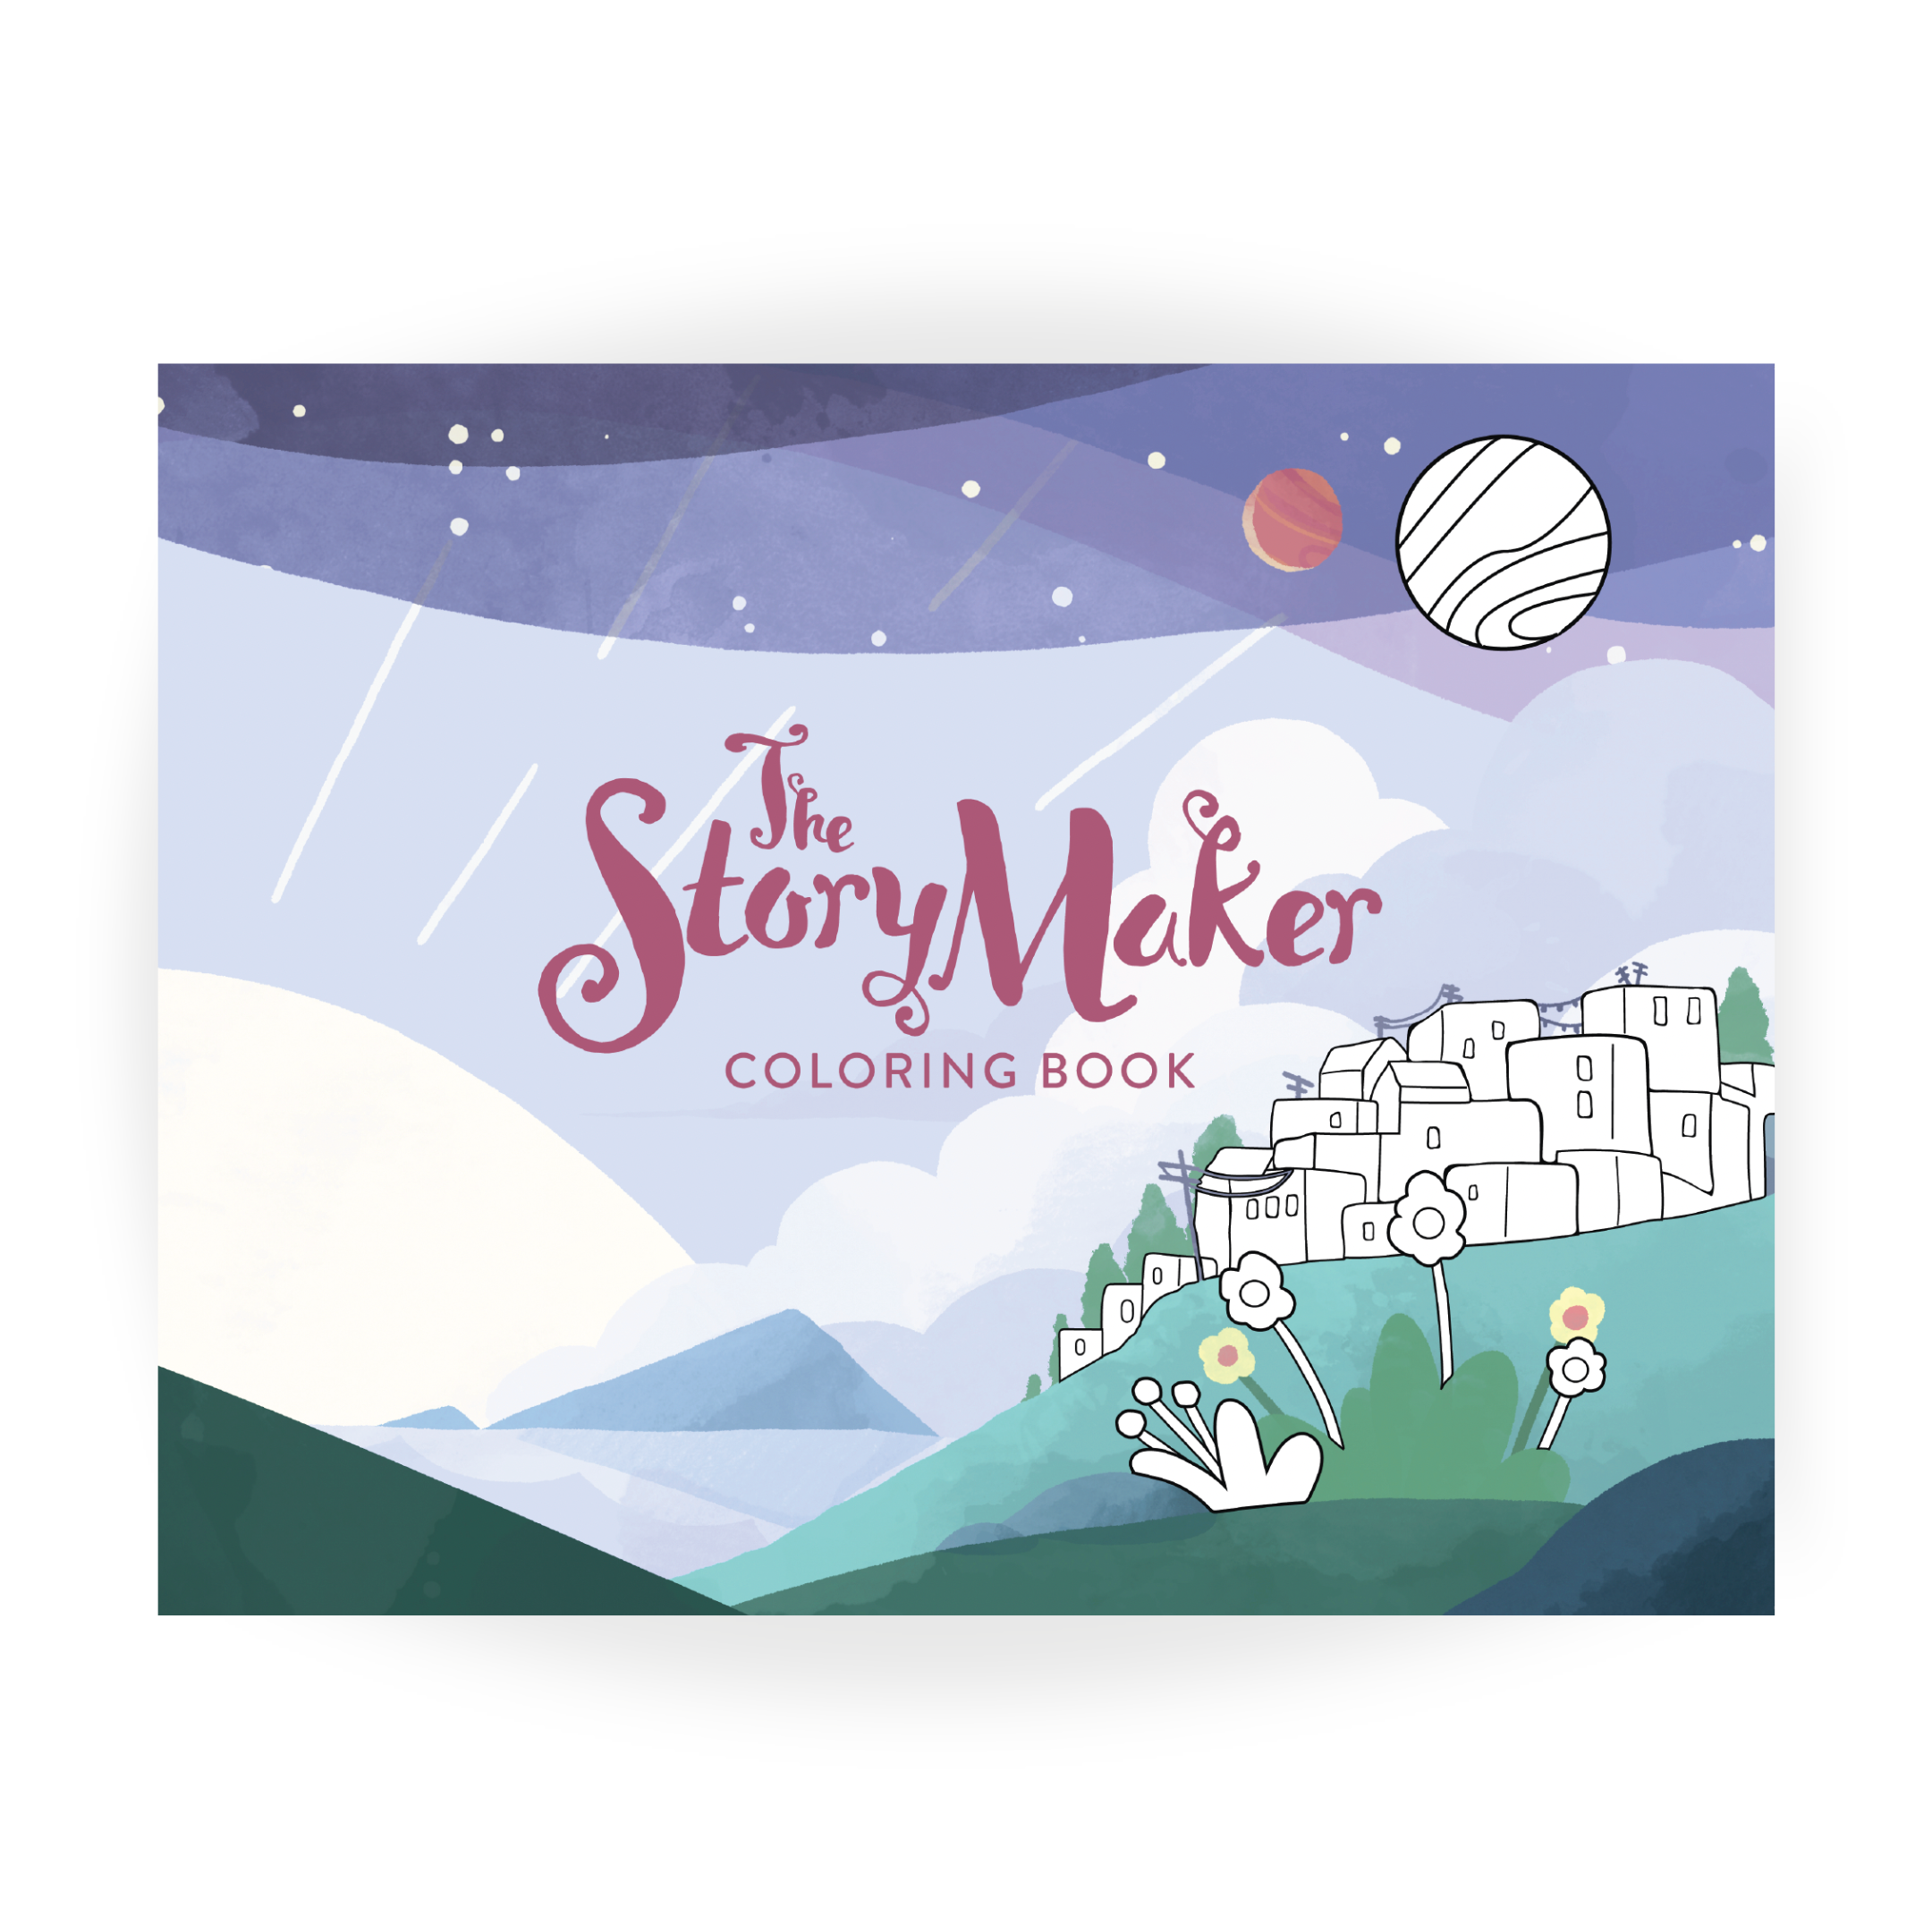 The story maker coloring book spread truth